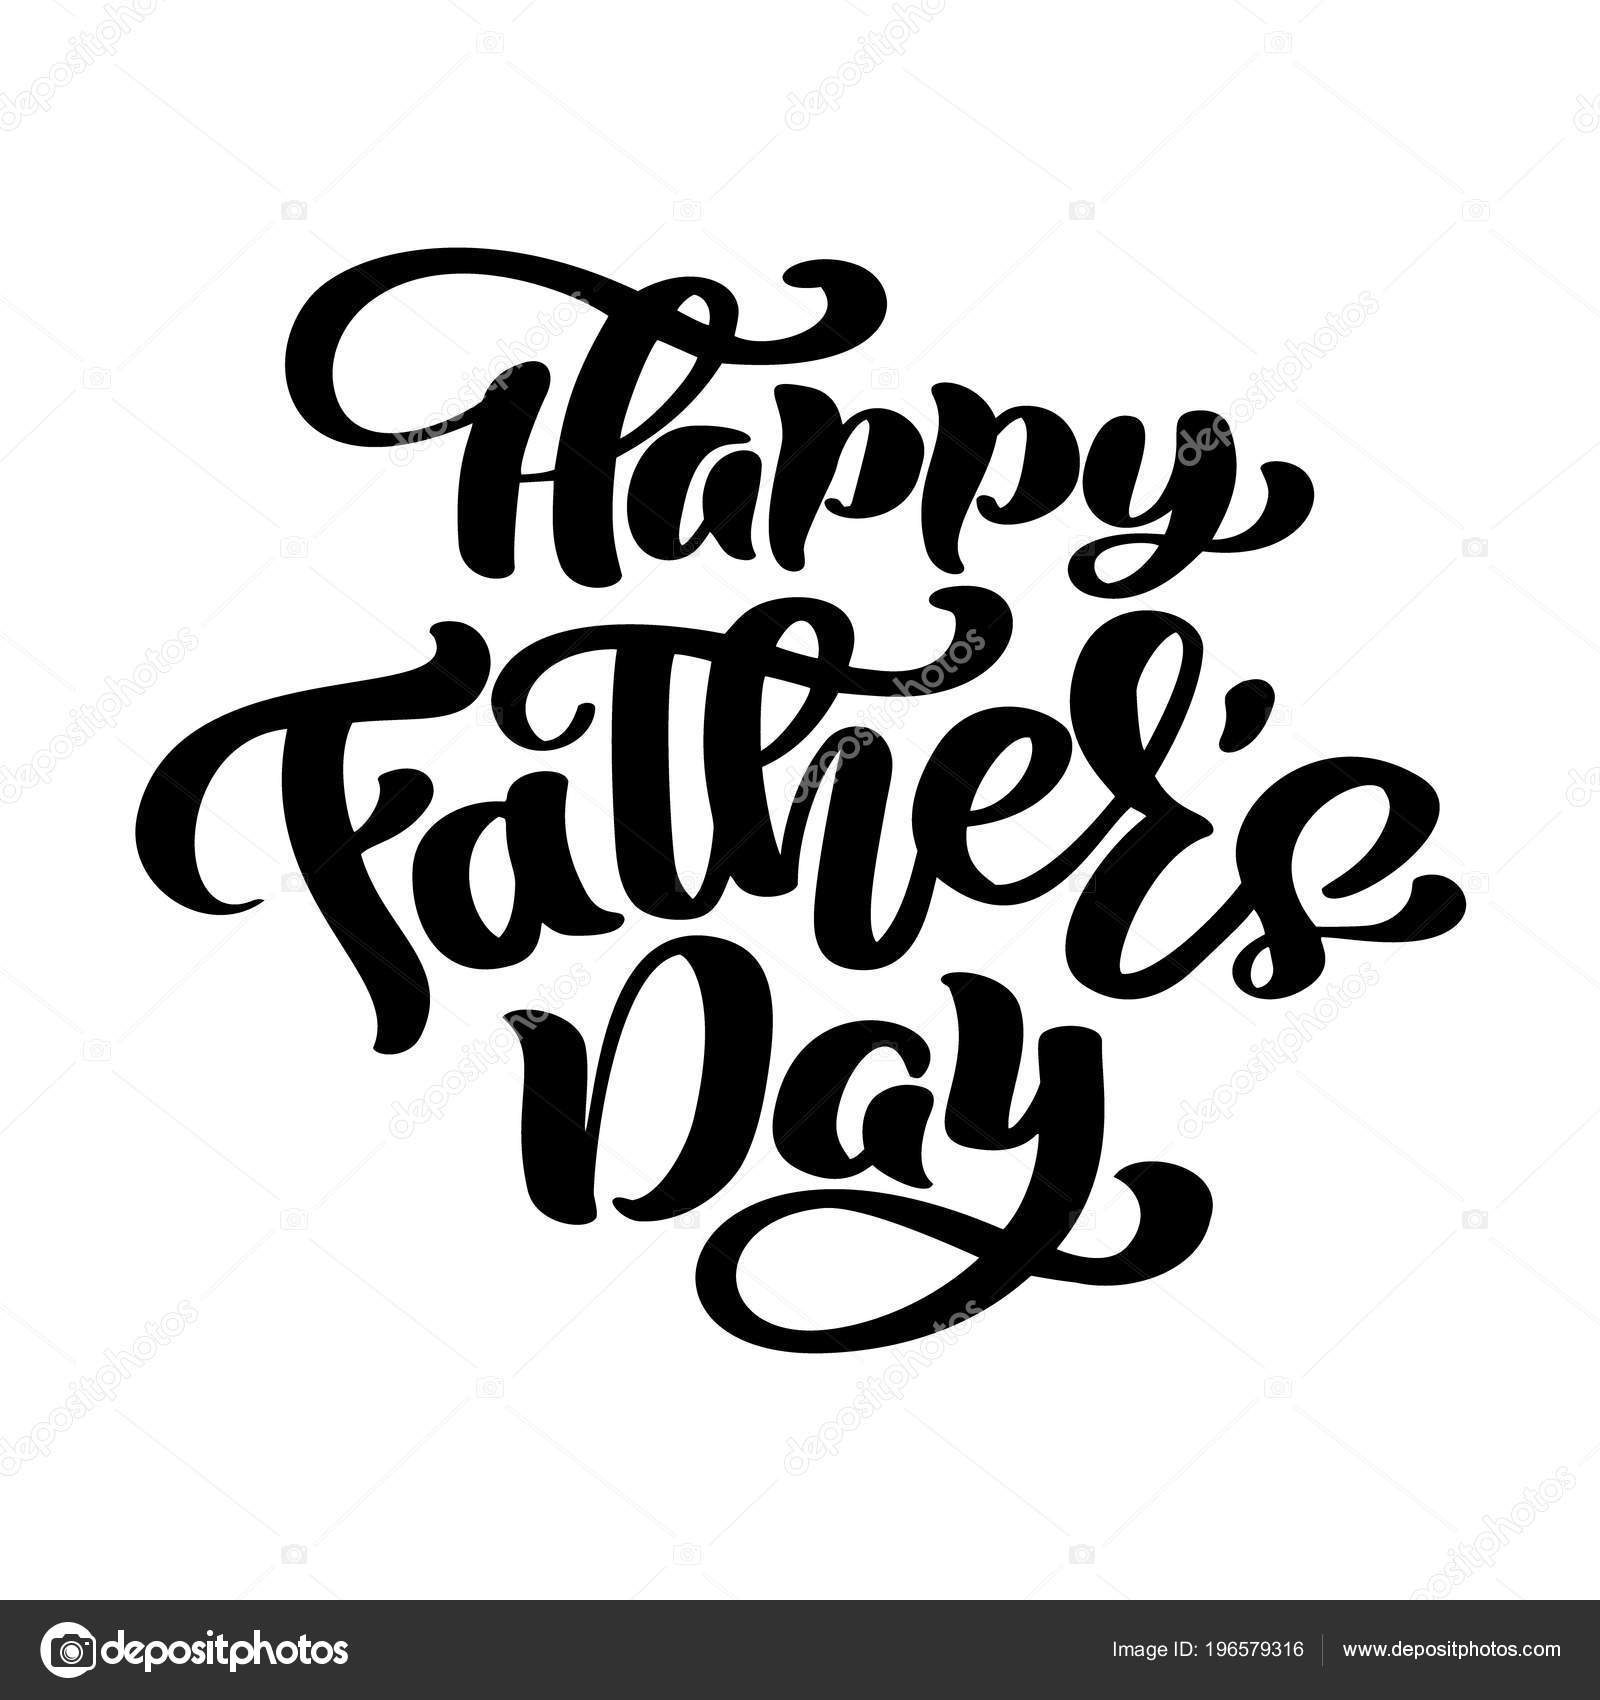 Download Happy fathers day phrase Hand drawn lettering fathers ...